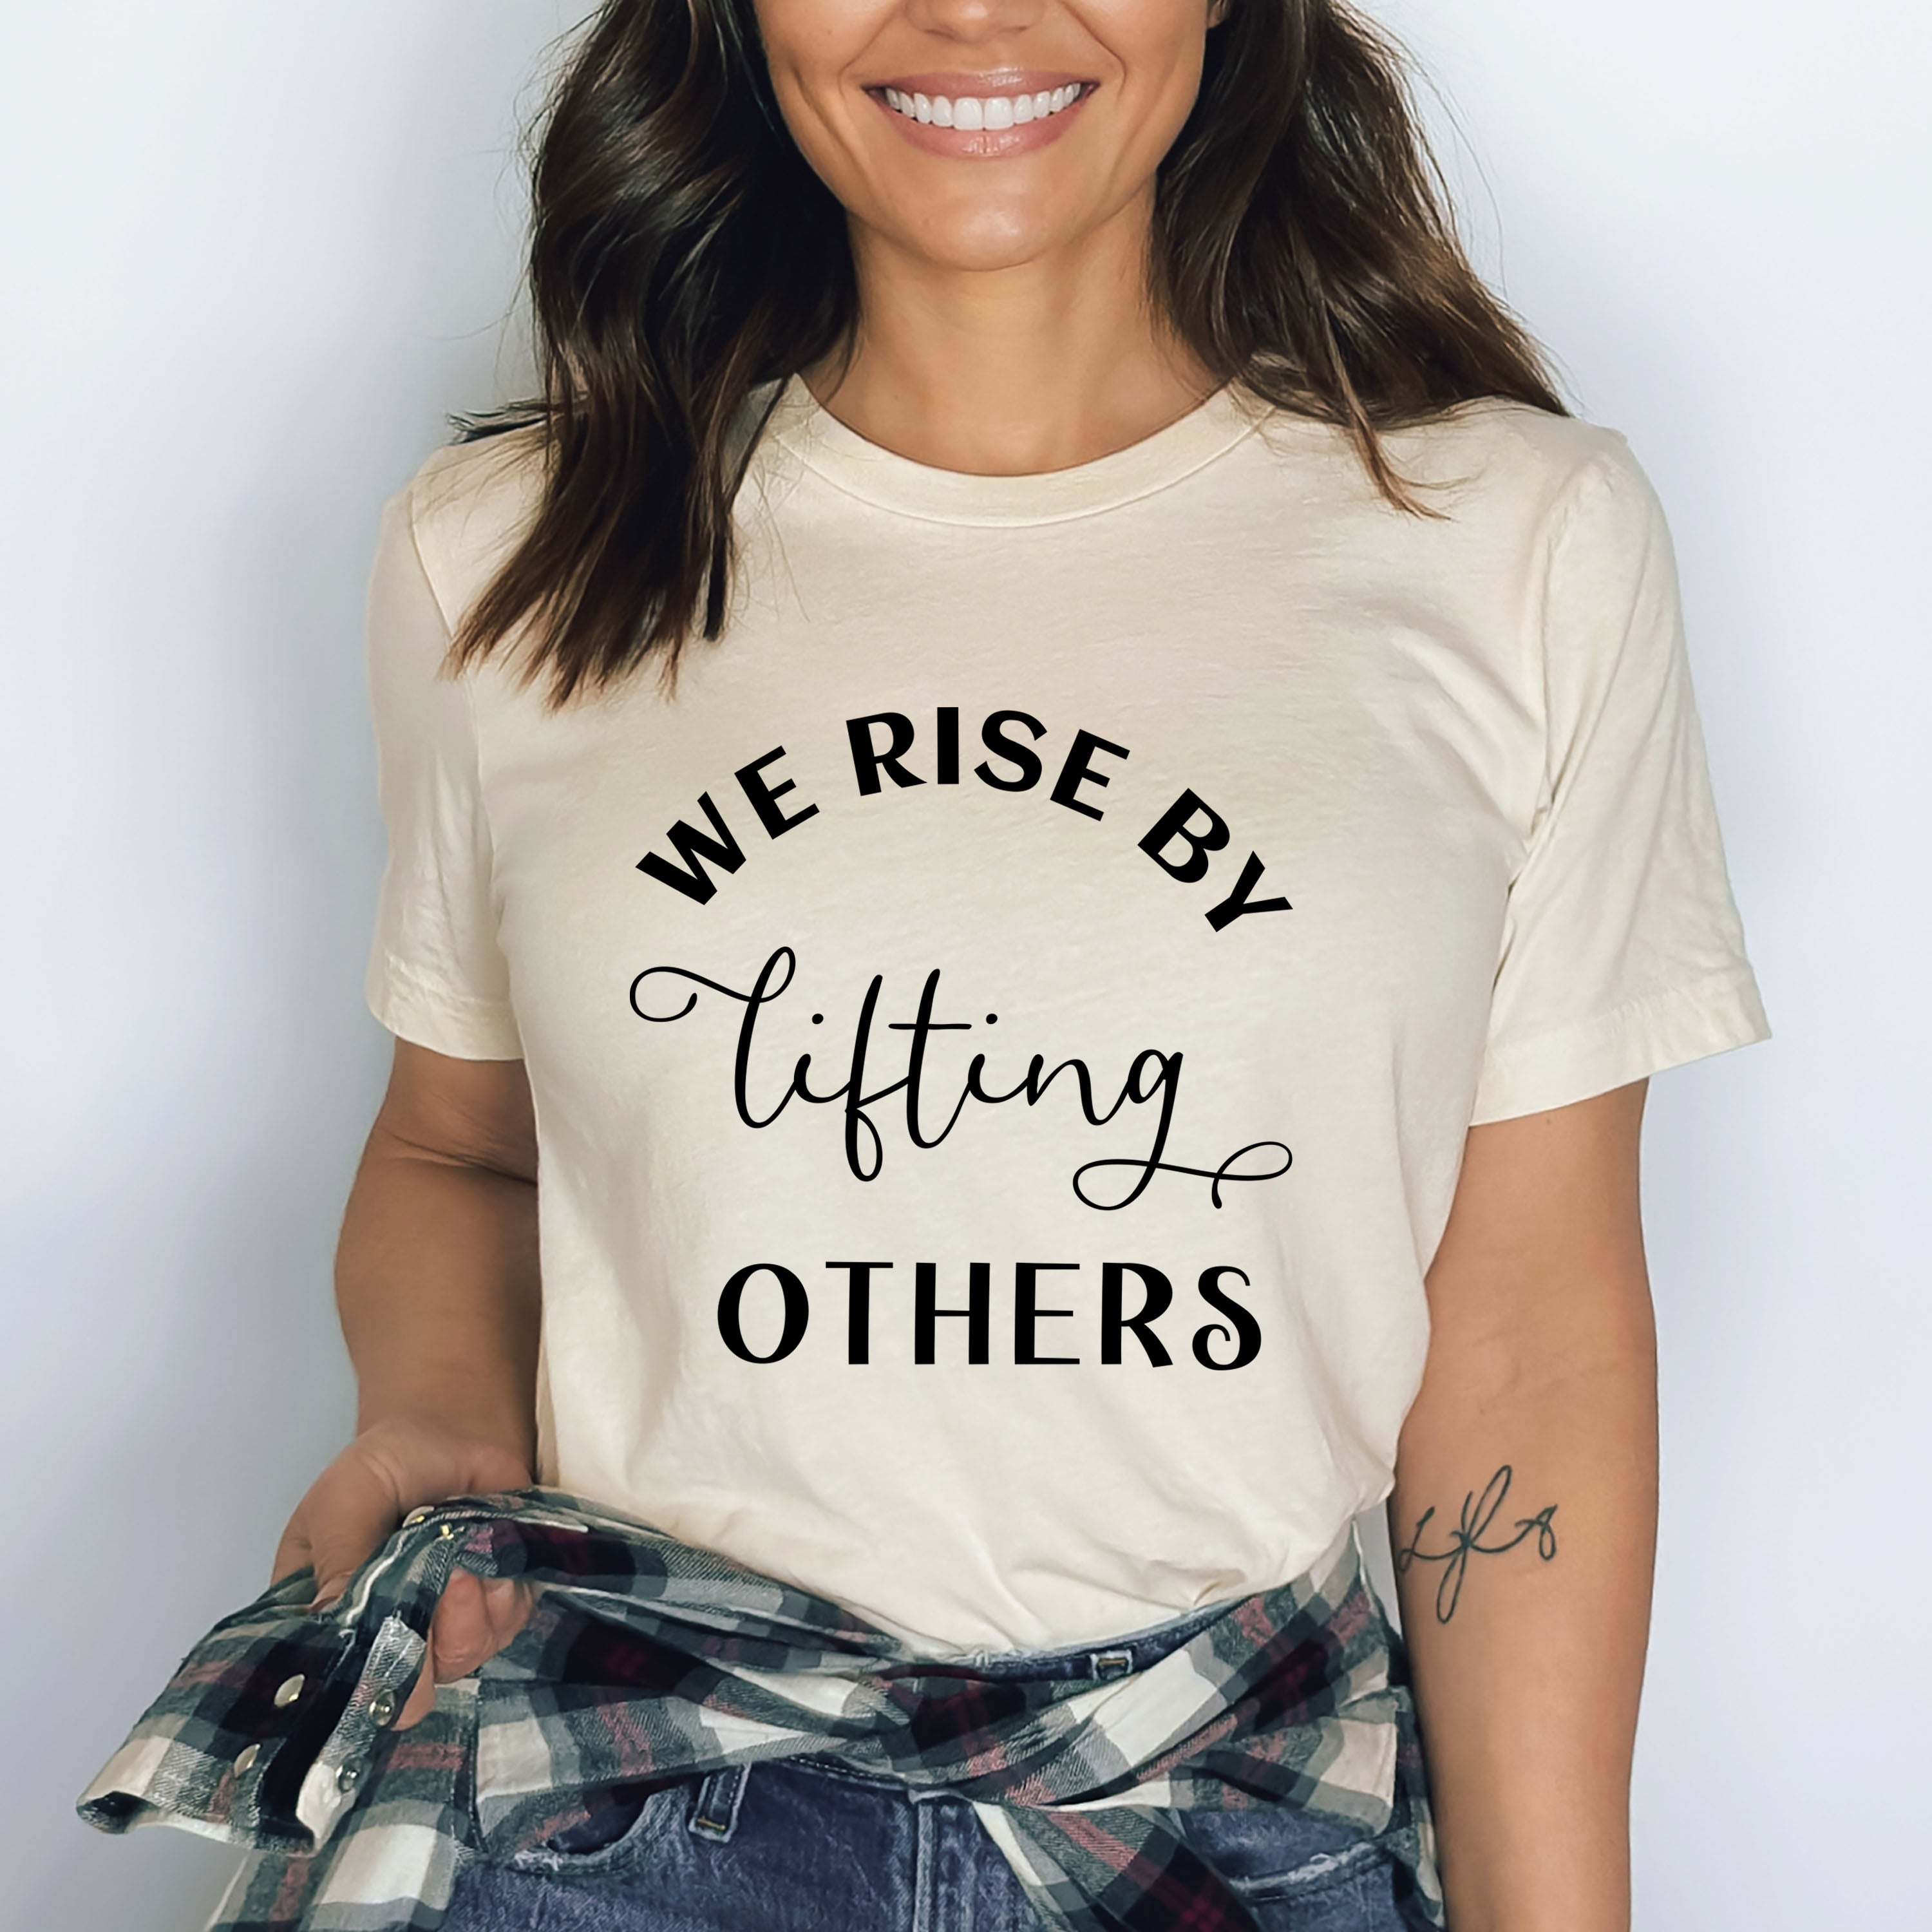 We Rise By Lifting Others - Bella canvas